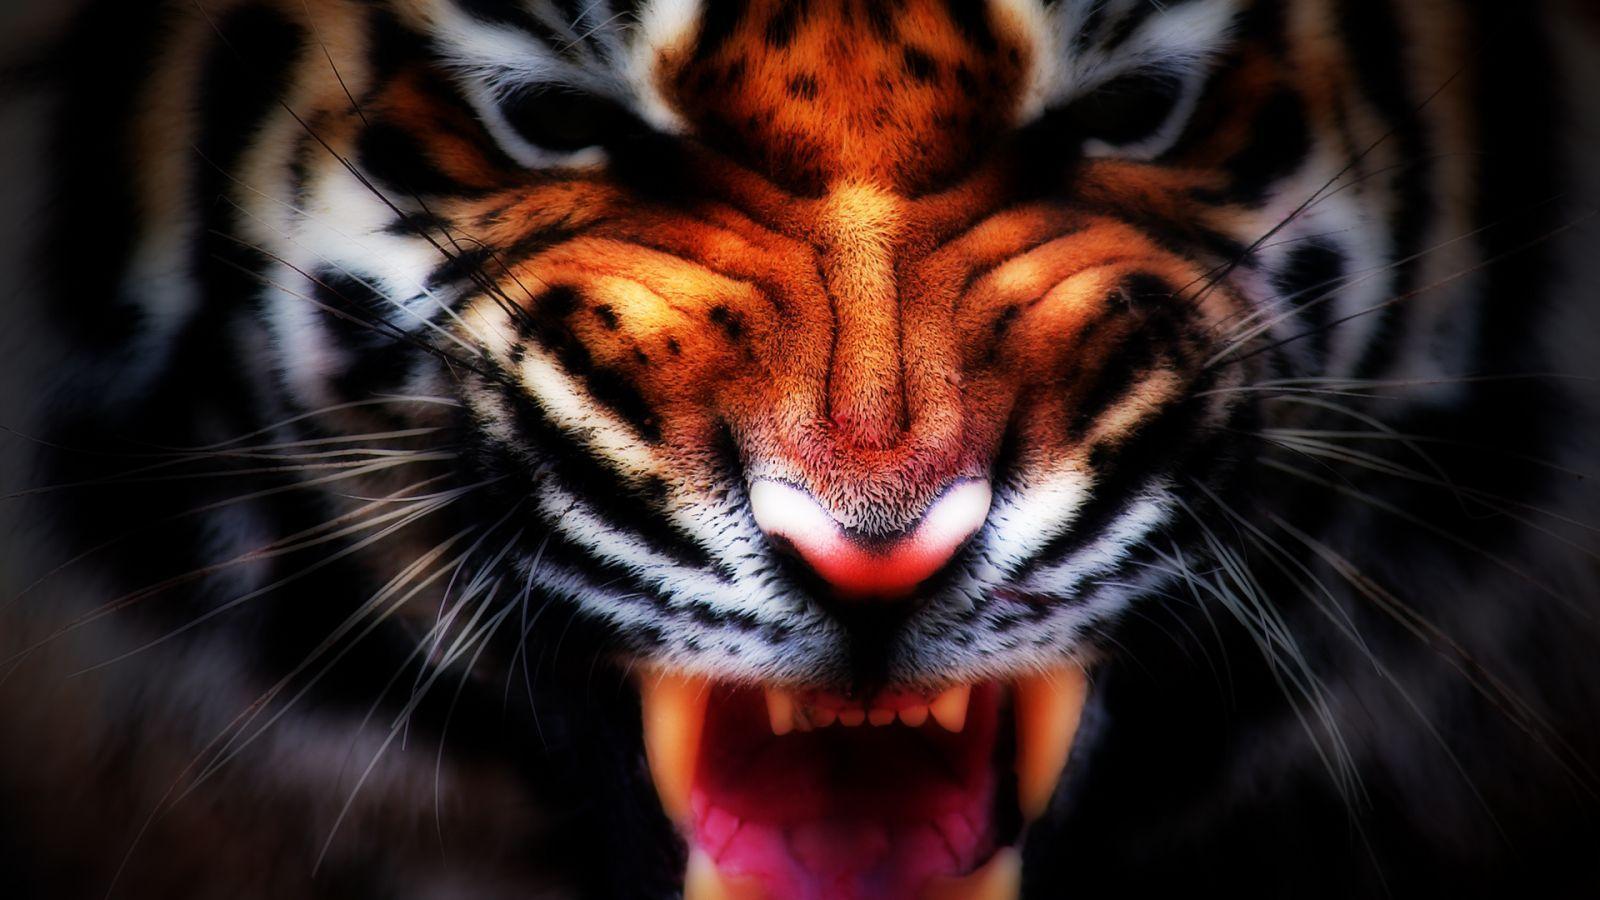 Tiger HD Wallpaper. Tiger Picture Free Download 1080p